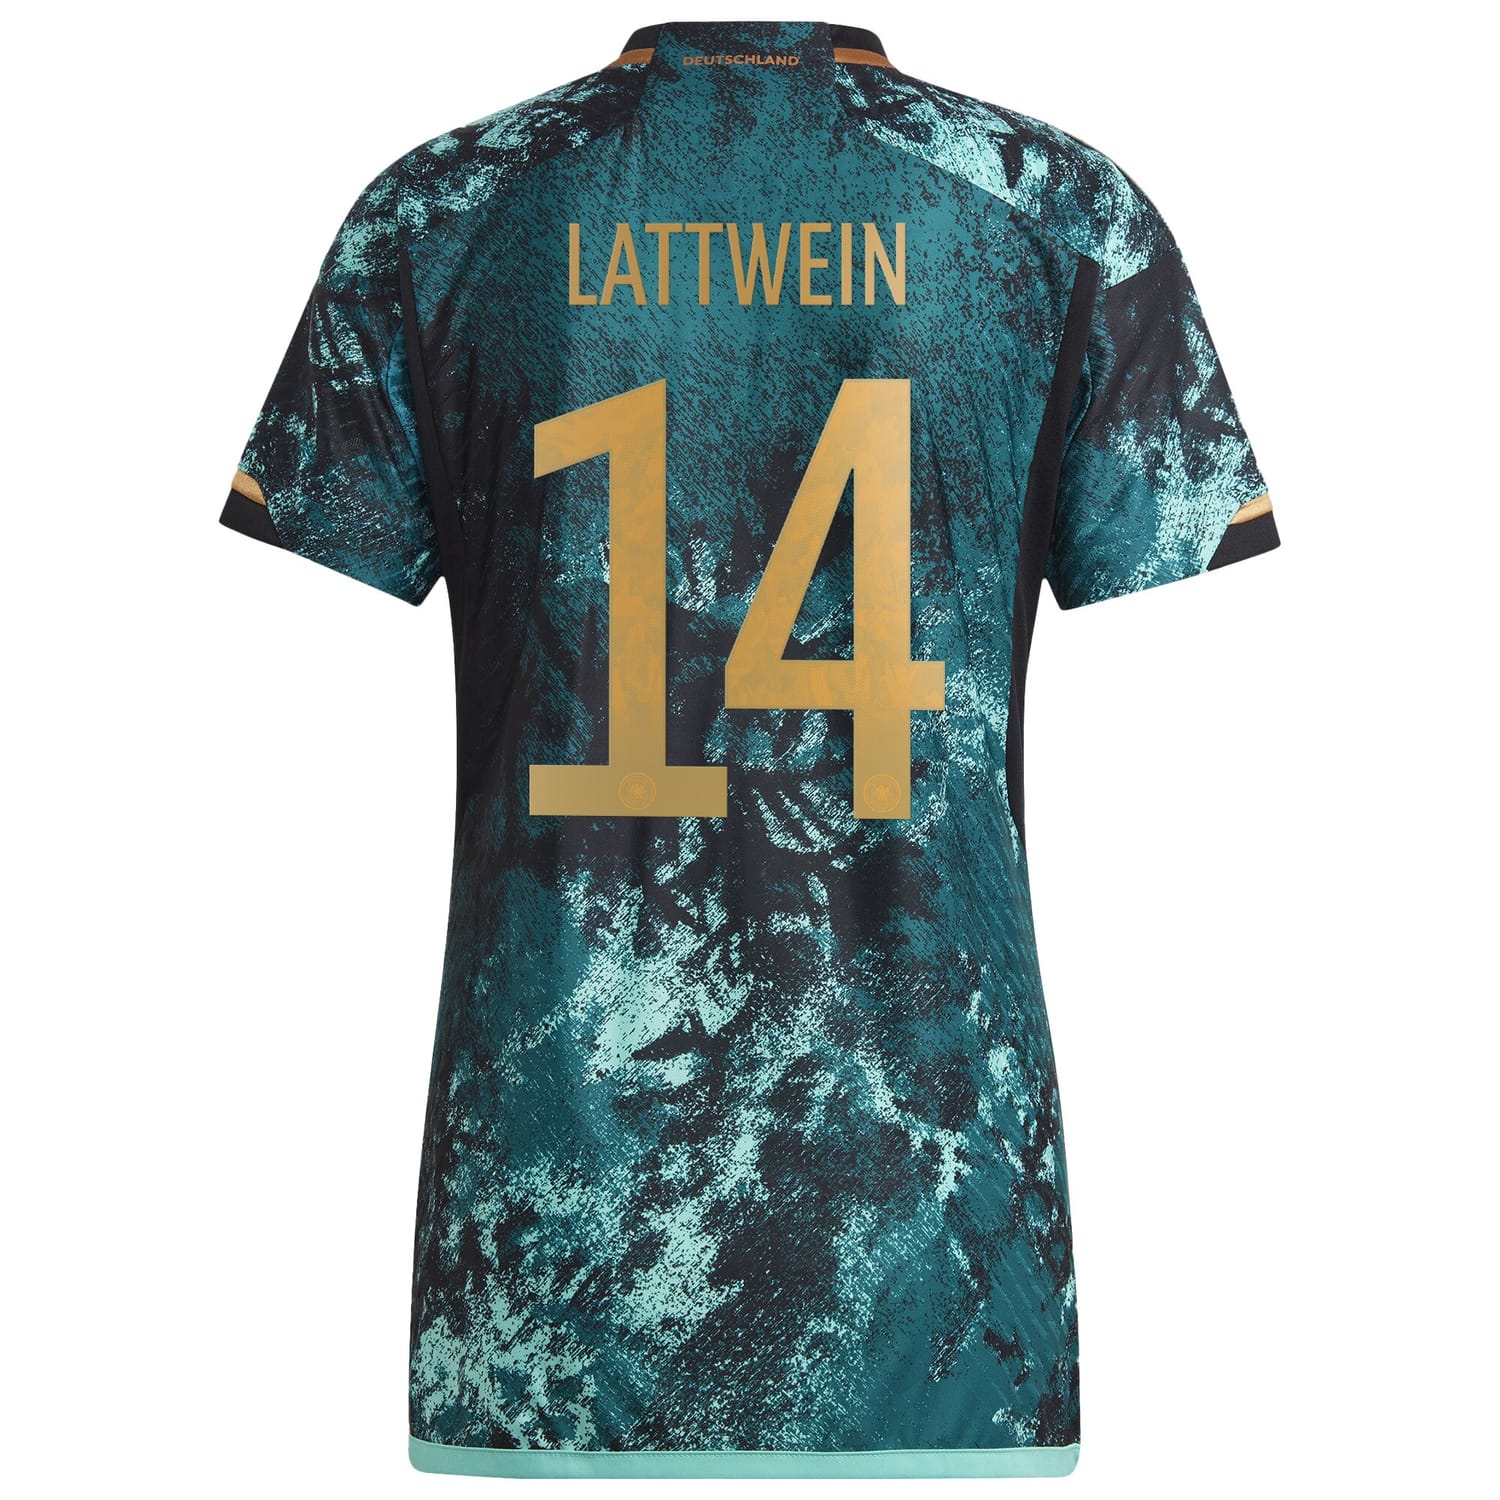 Germany National Team Away Authentic Jersey Shirt 2023 player Lena Lattwein 14 printing for Women